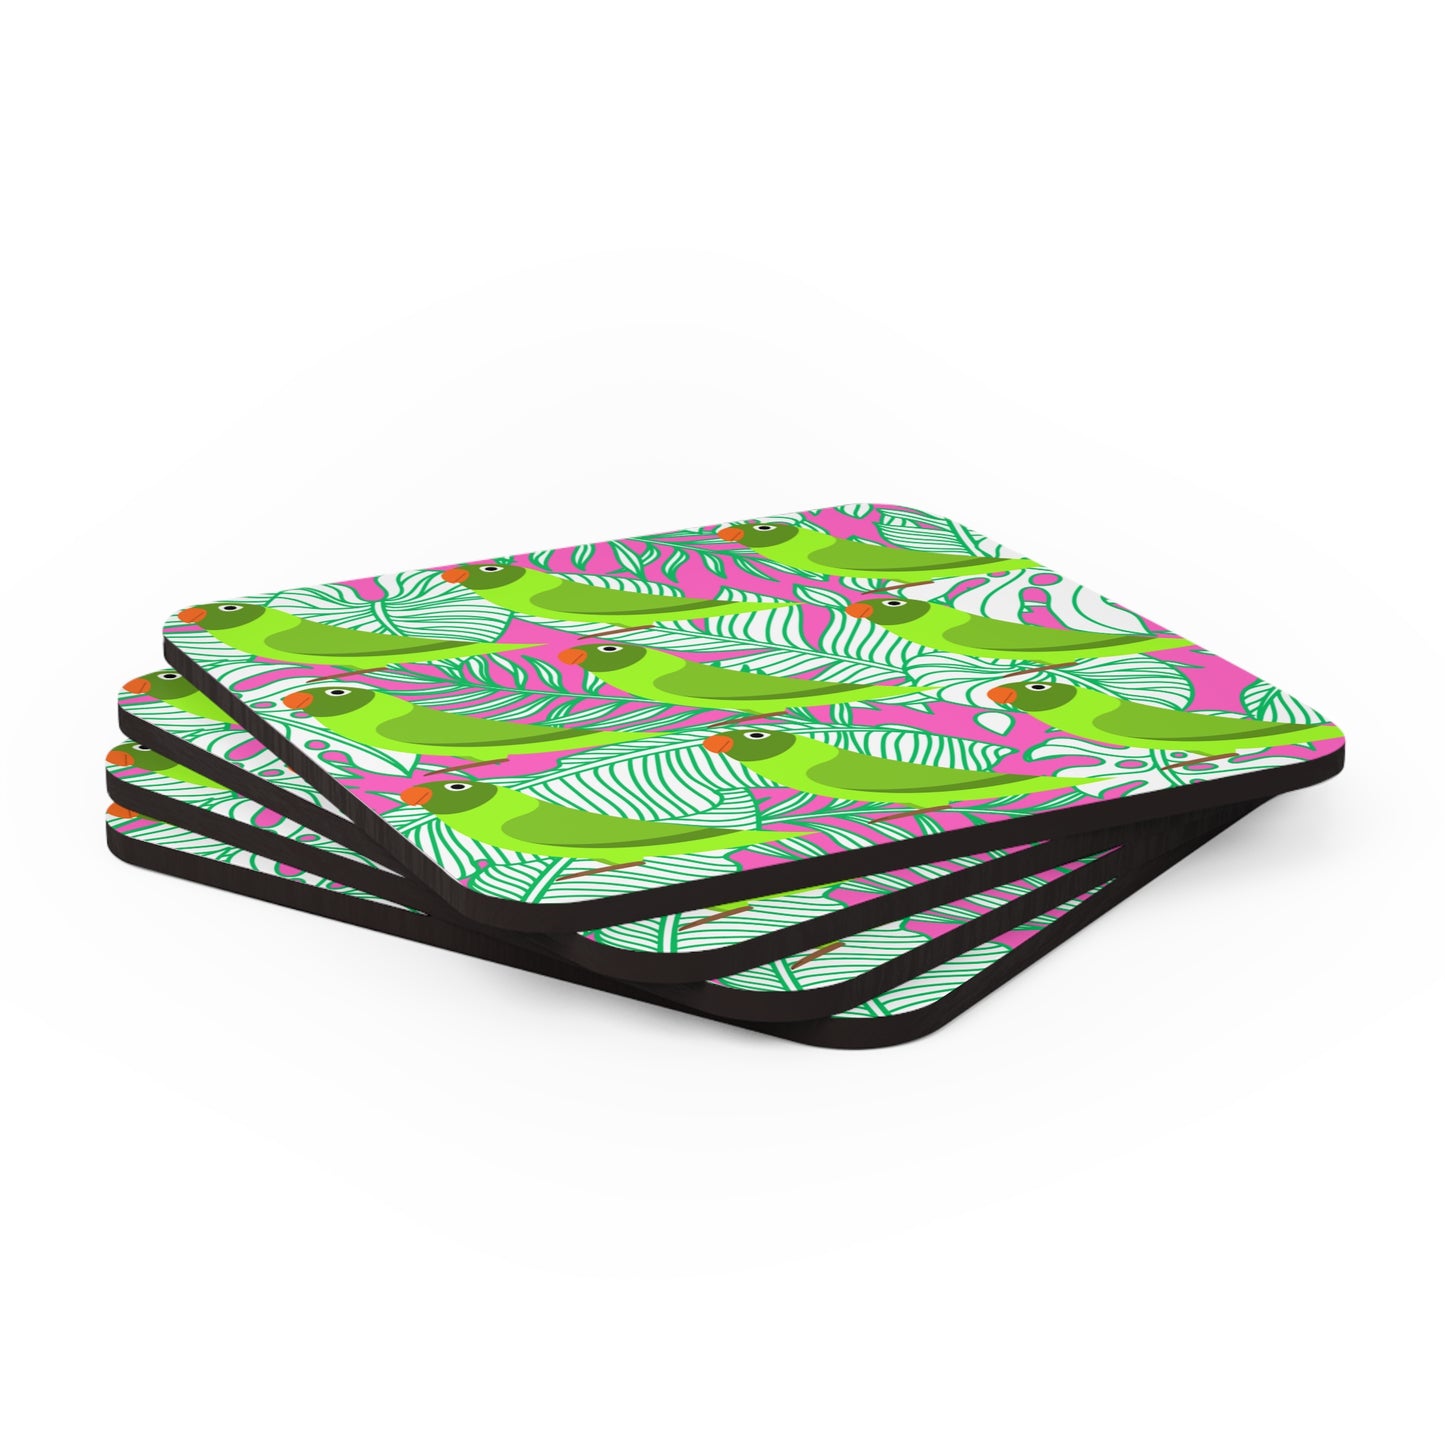 Parrots of Palm Beach Tropical Hot Pink Cocktail Party Beverages  Entertaining Corkwood Coaster Set